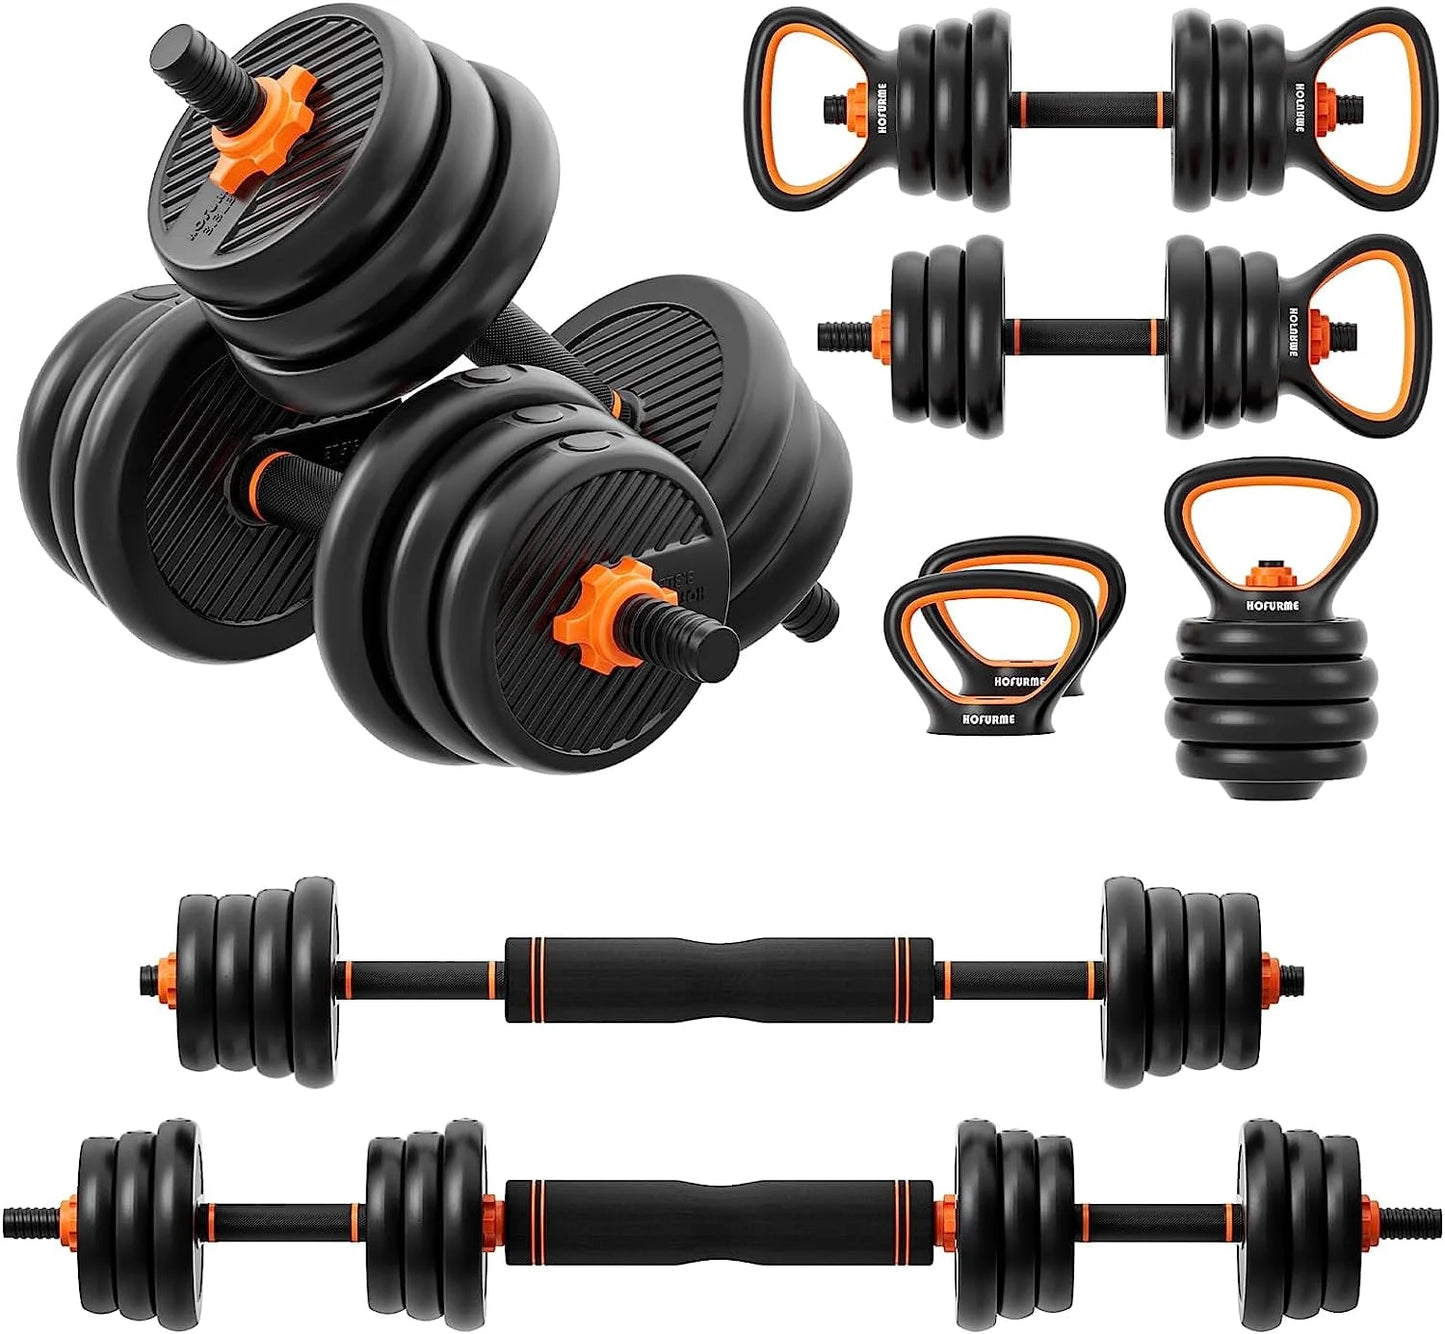 Adjustable Dumbbell Set, 55 Lbs Free Weights Dumbbells, Barbell, Kettlebell and Push-Up, Home Gym Fitness Workout Equipment, Black